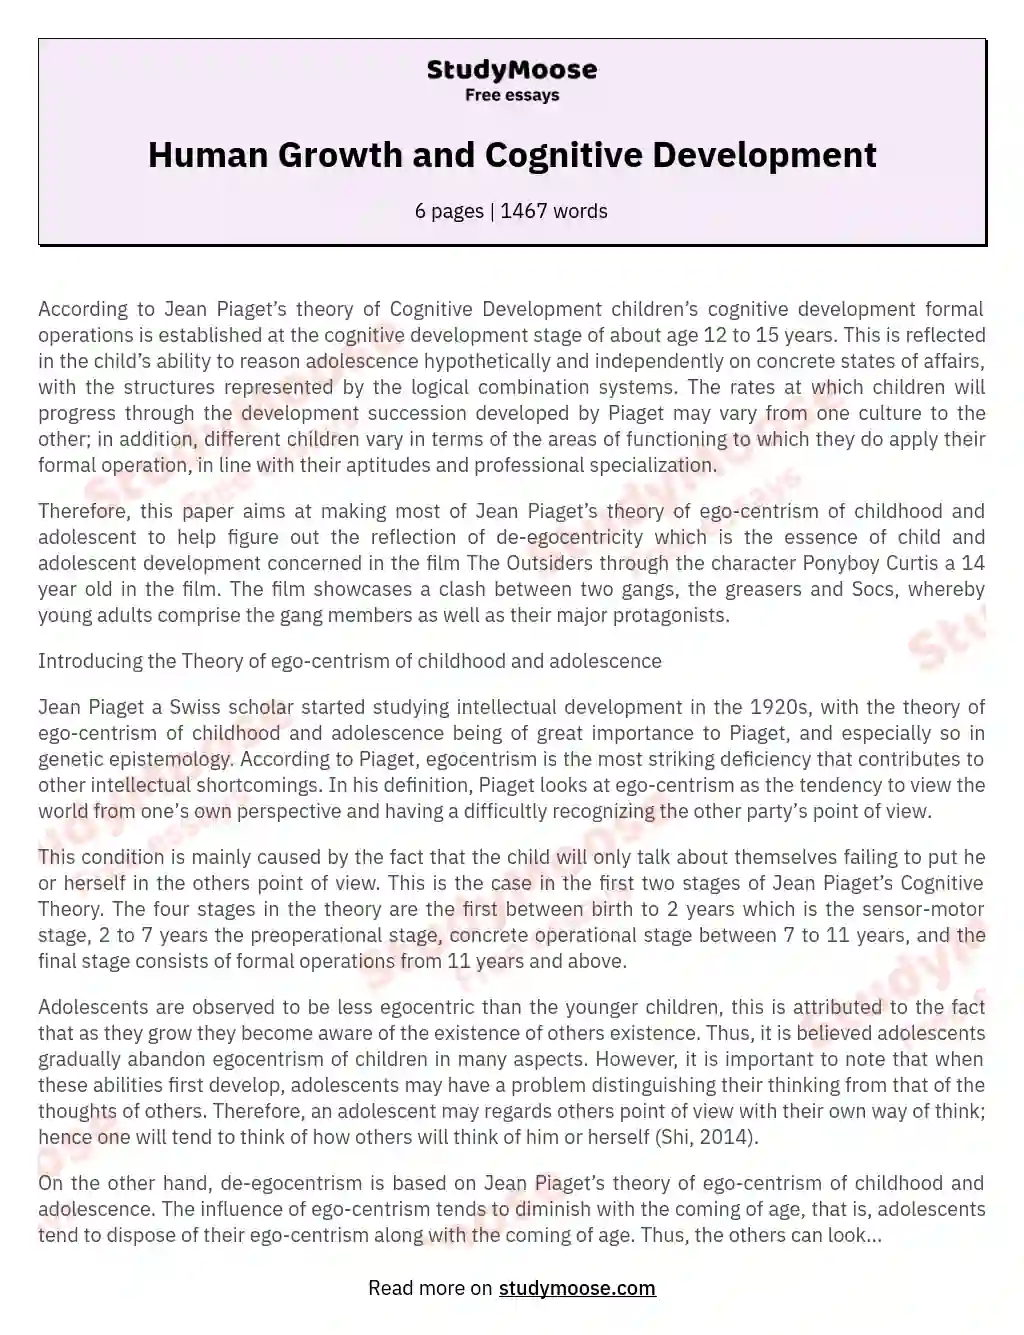 Human Growth and Cognitive Development essay